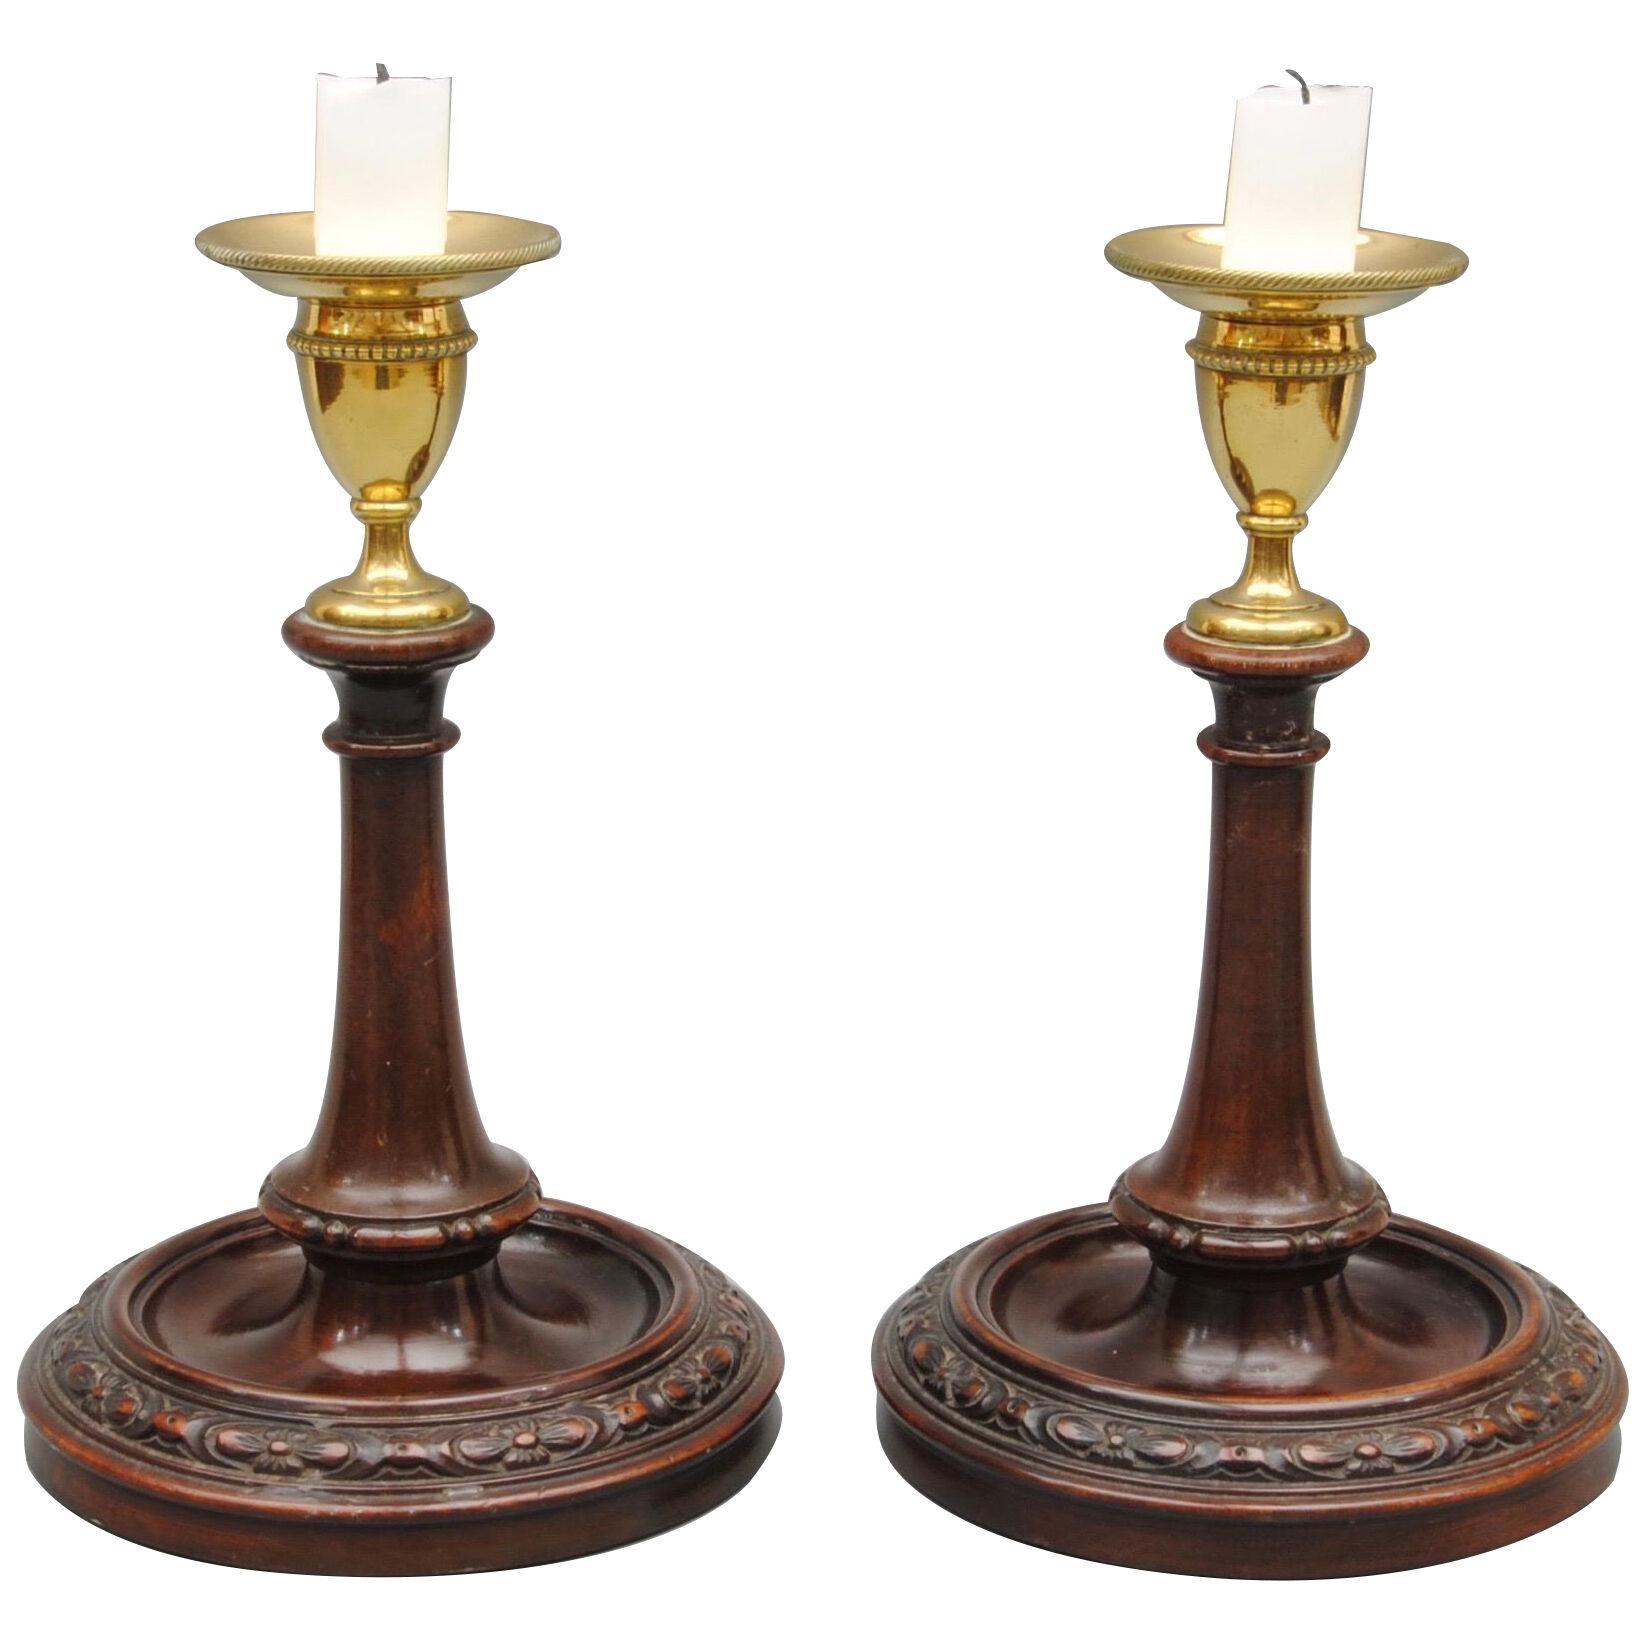 Pair of 18th Century Mahogany and Brass Candlesticks